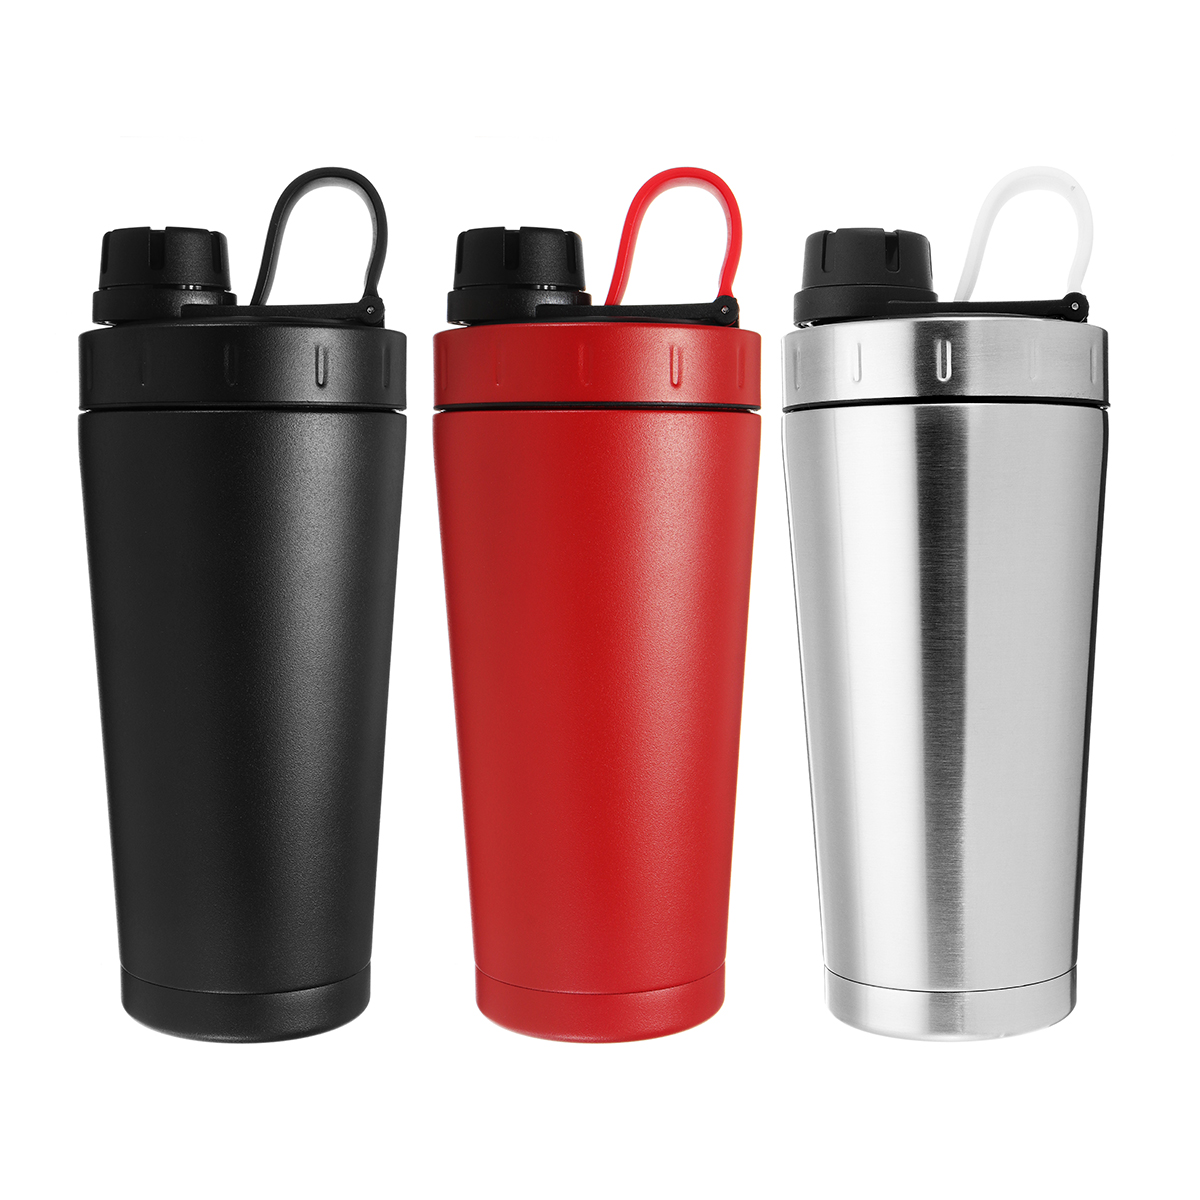 

700ML Stainless Steel Insulated Vacuum Flask Thermos Water Bottle Travel Mug